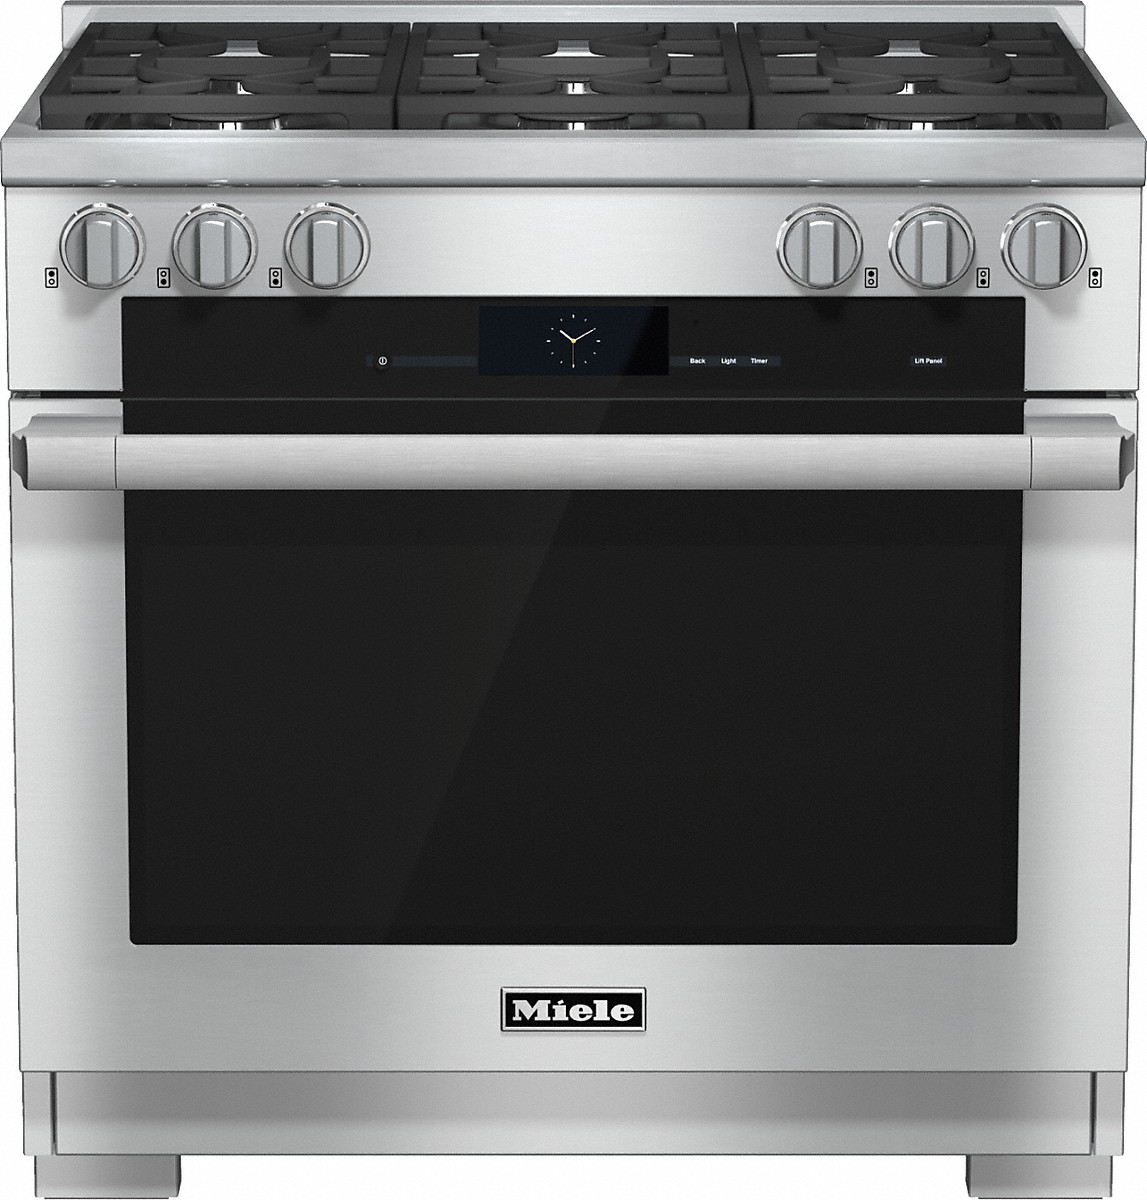 Miele - 5.8 cu. ft  Dual Fuel Range in Stainless - HR 1934-2 G